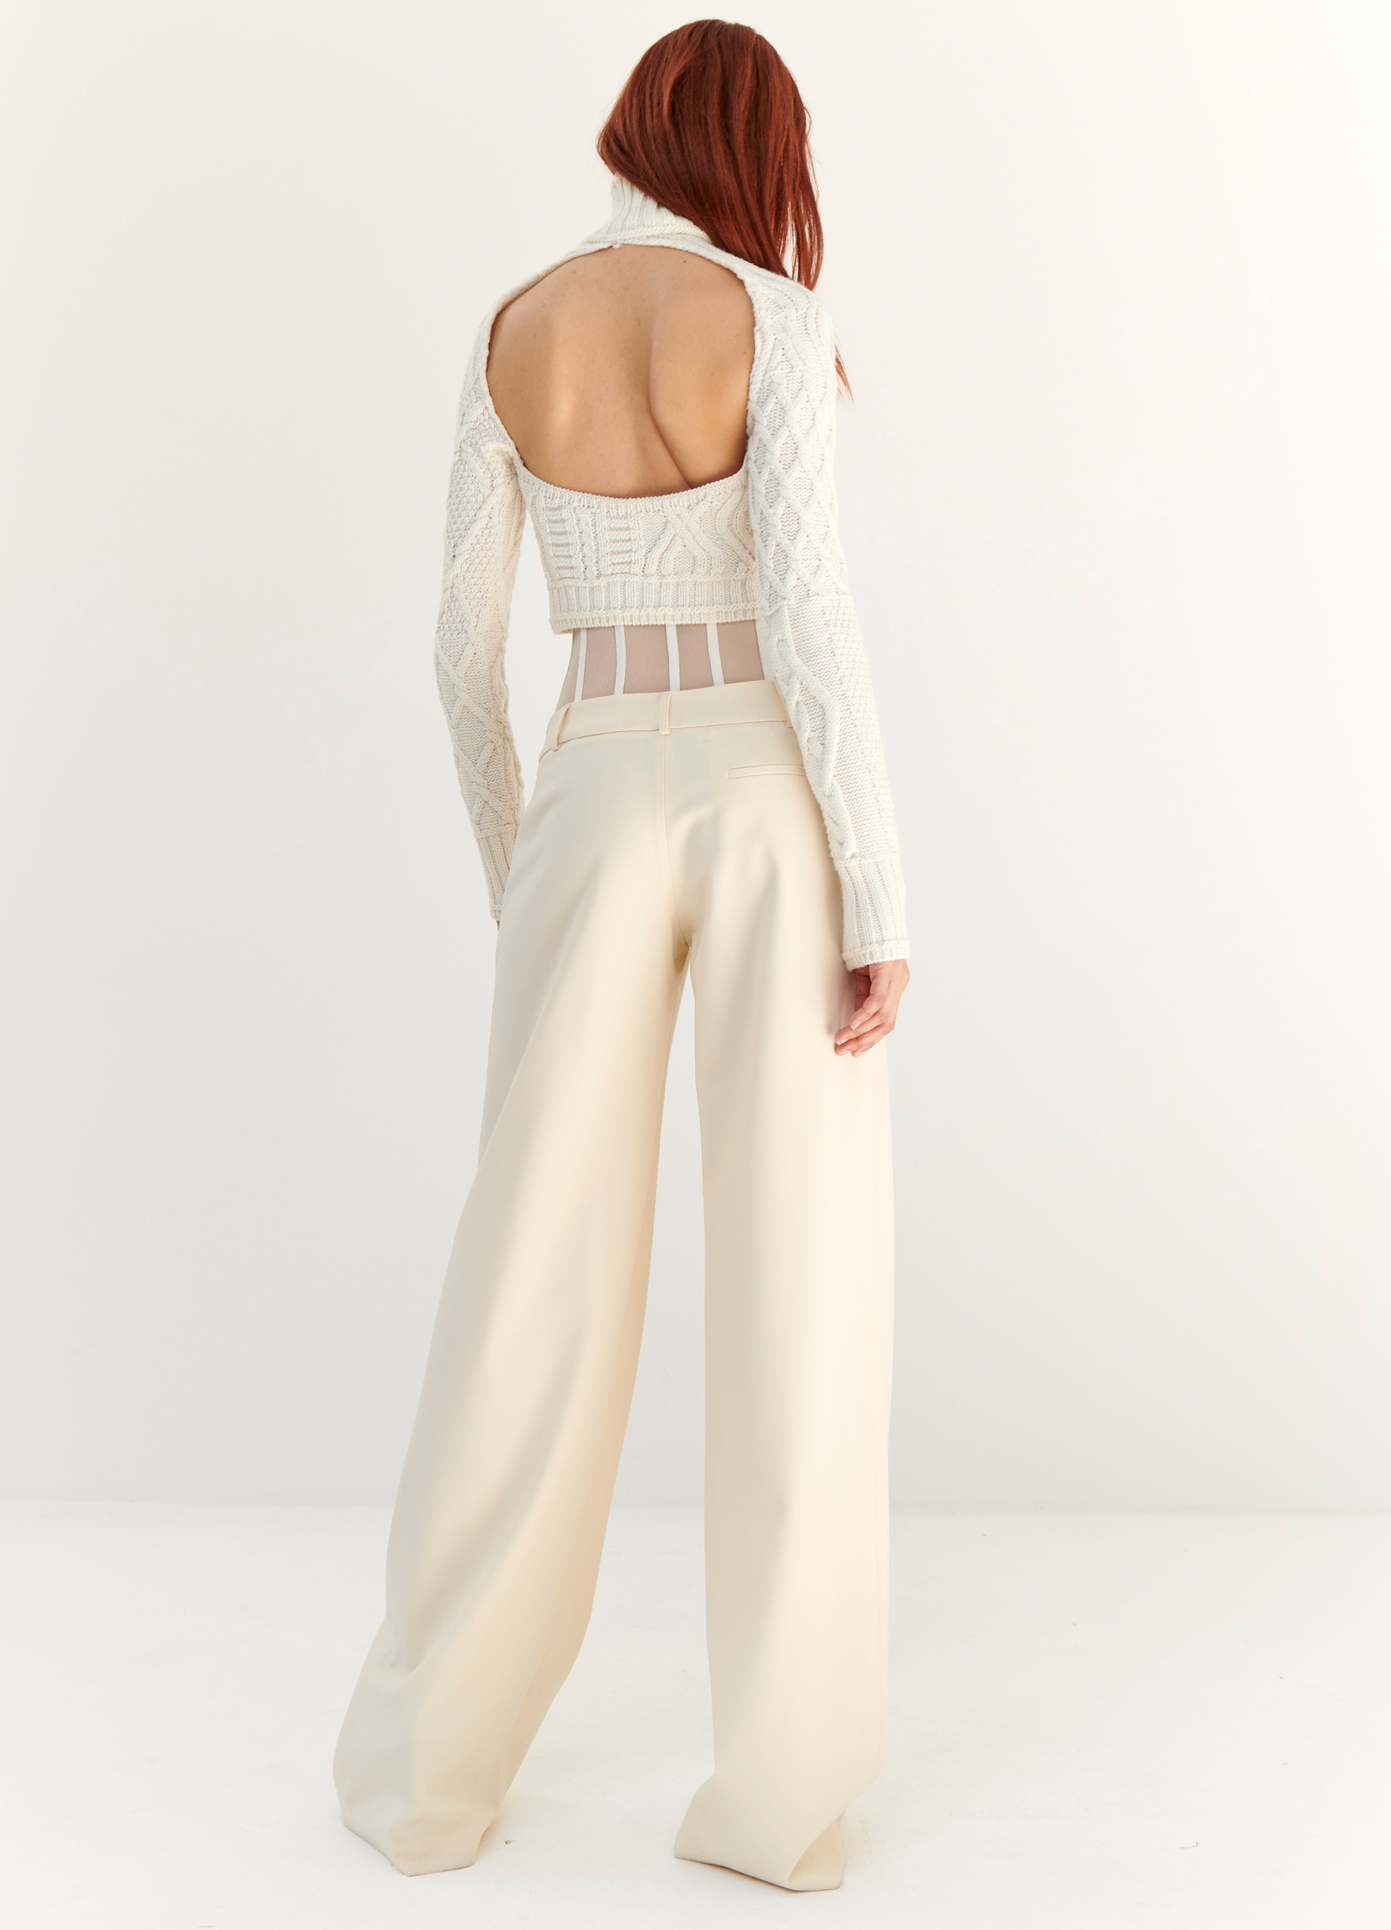 MONSE Mesh Bustier Trousers in Ivory on model full back view